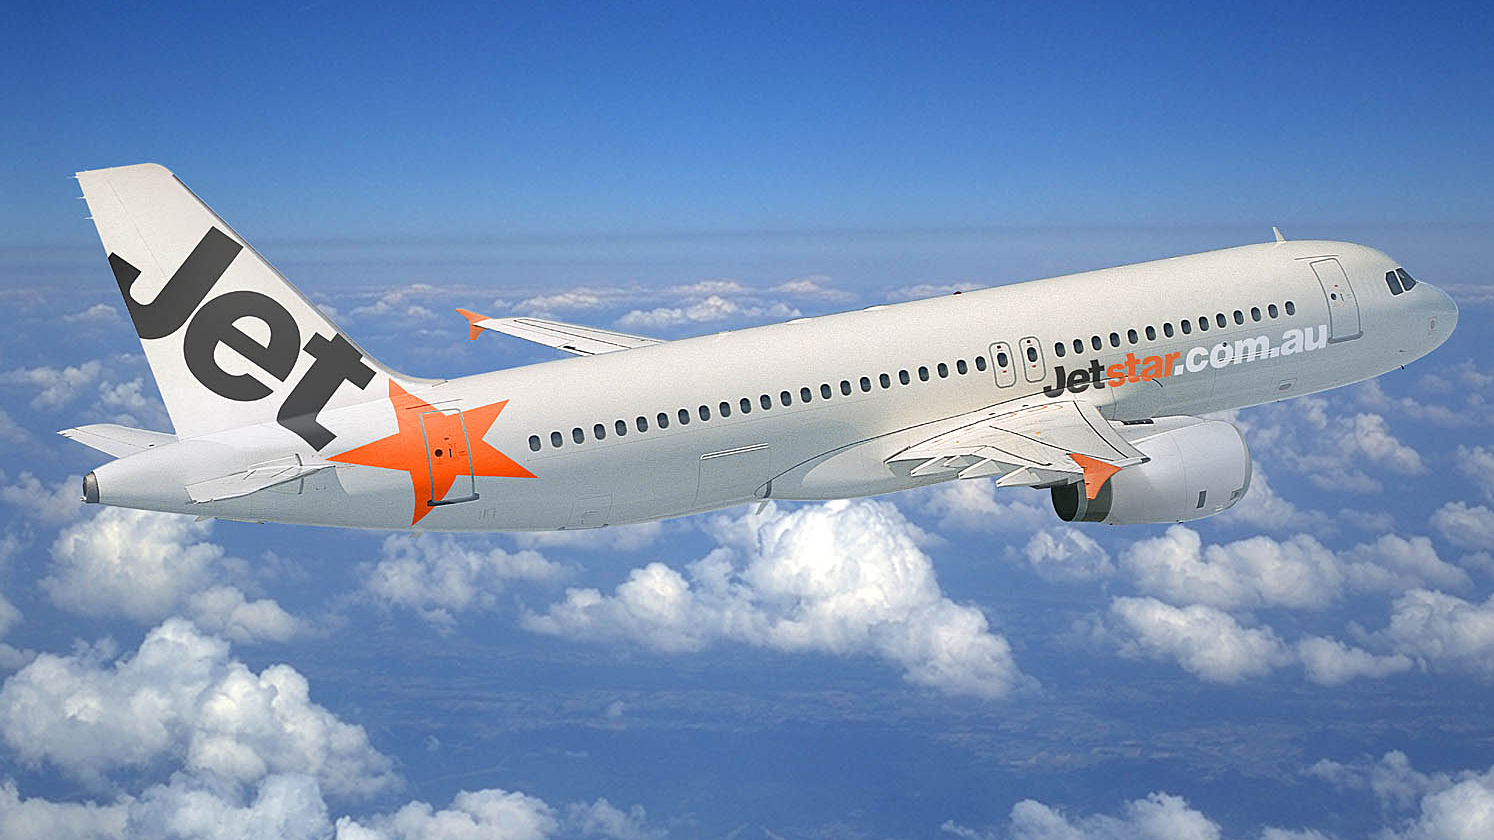 #Jetstar: Airline To Use Singlish For In-Flight